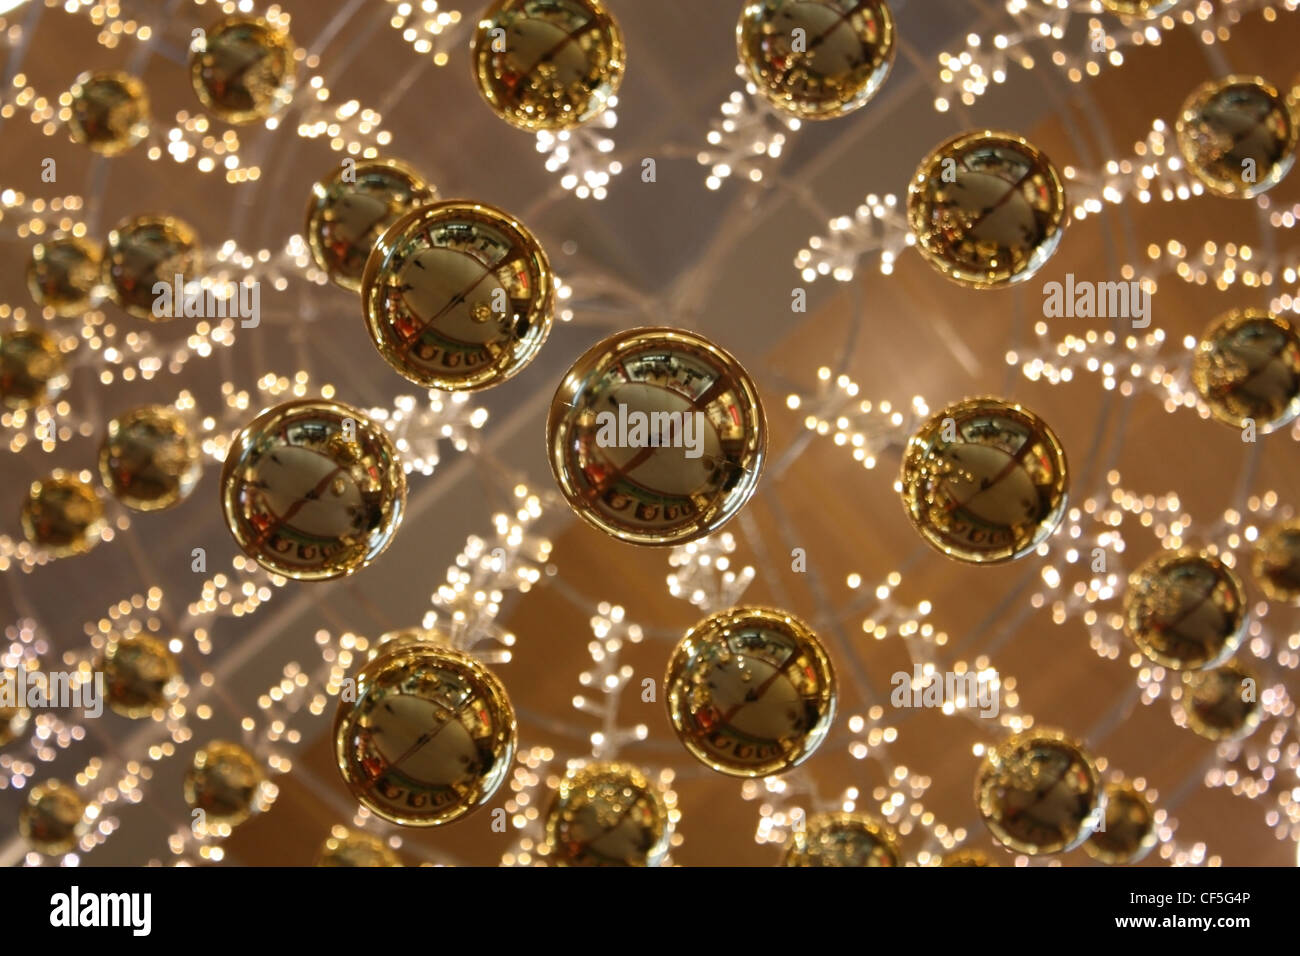 Christmas Ornaments Hanging From A Ceiling Stock Photo 43763014